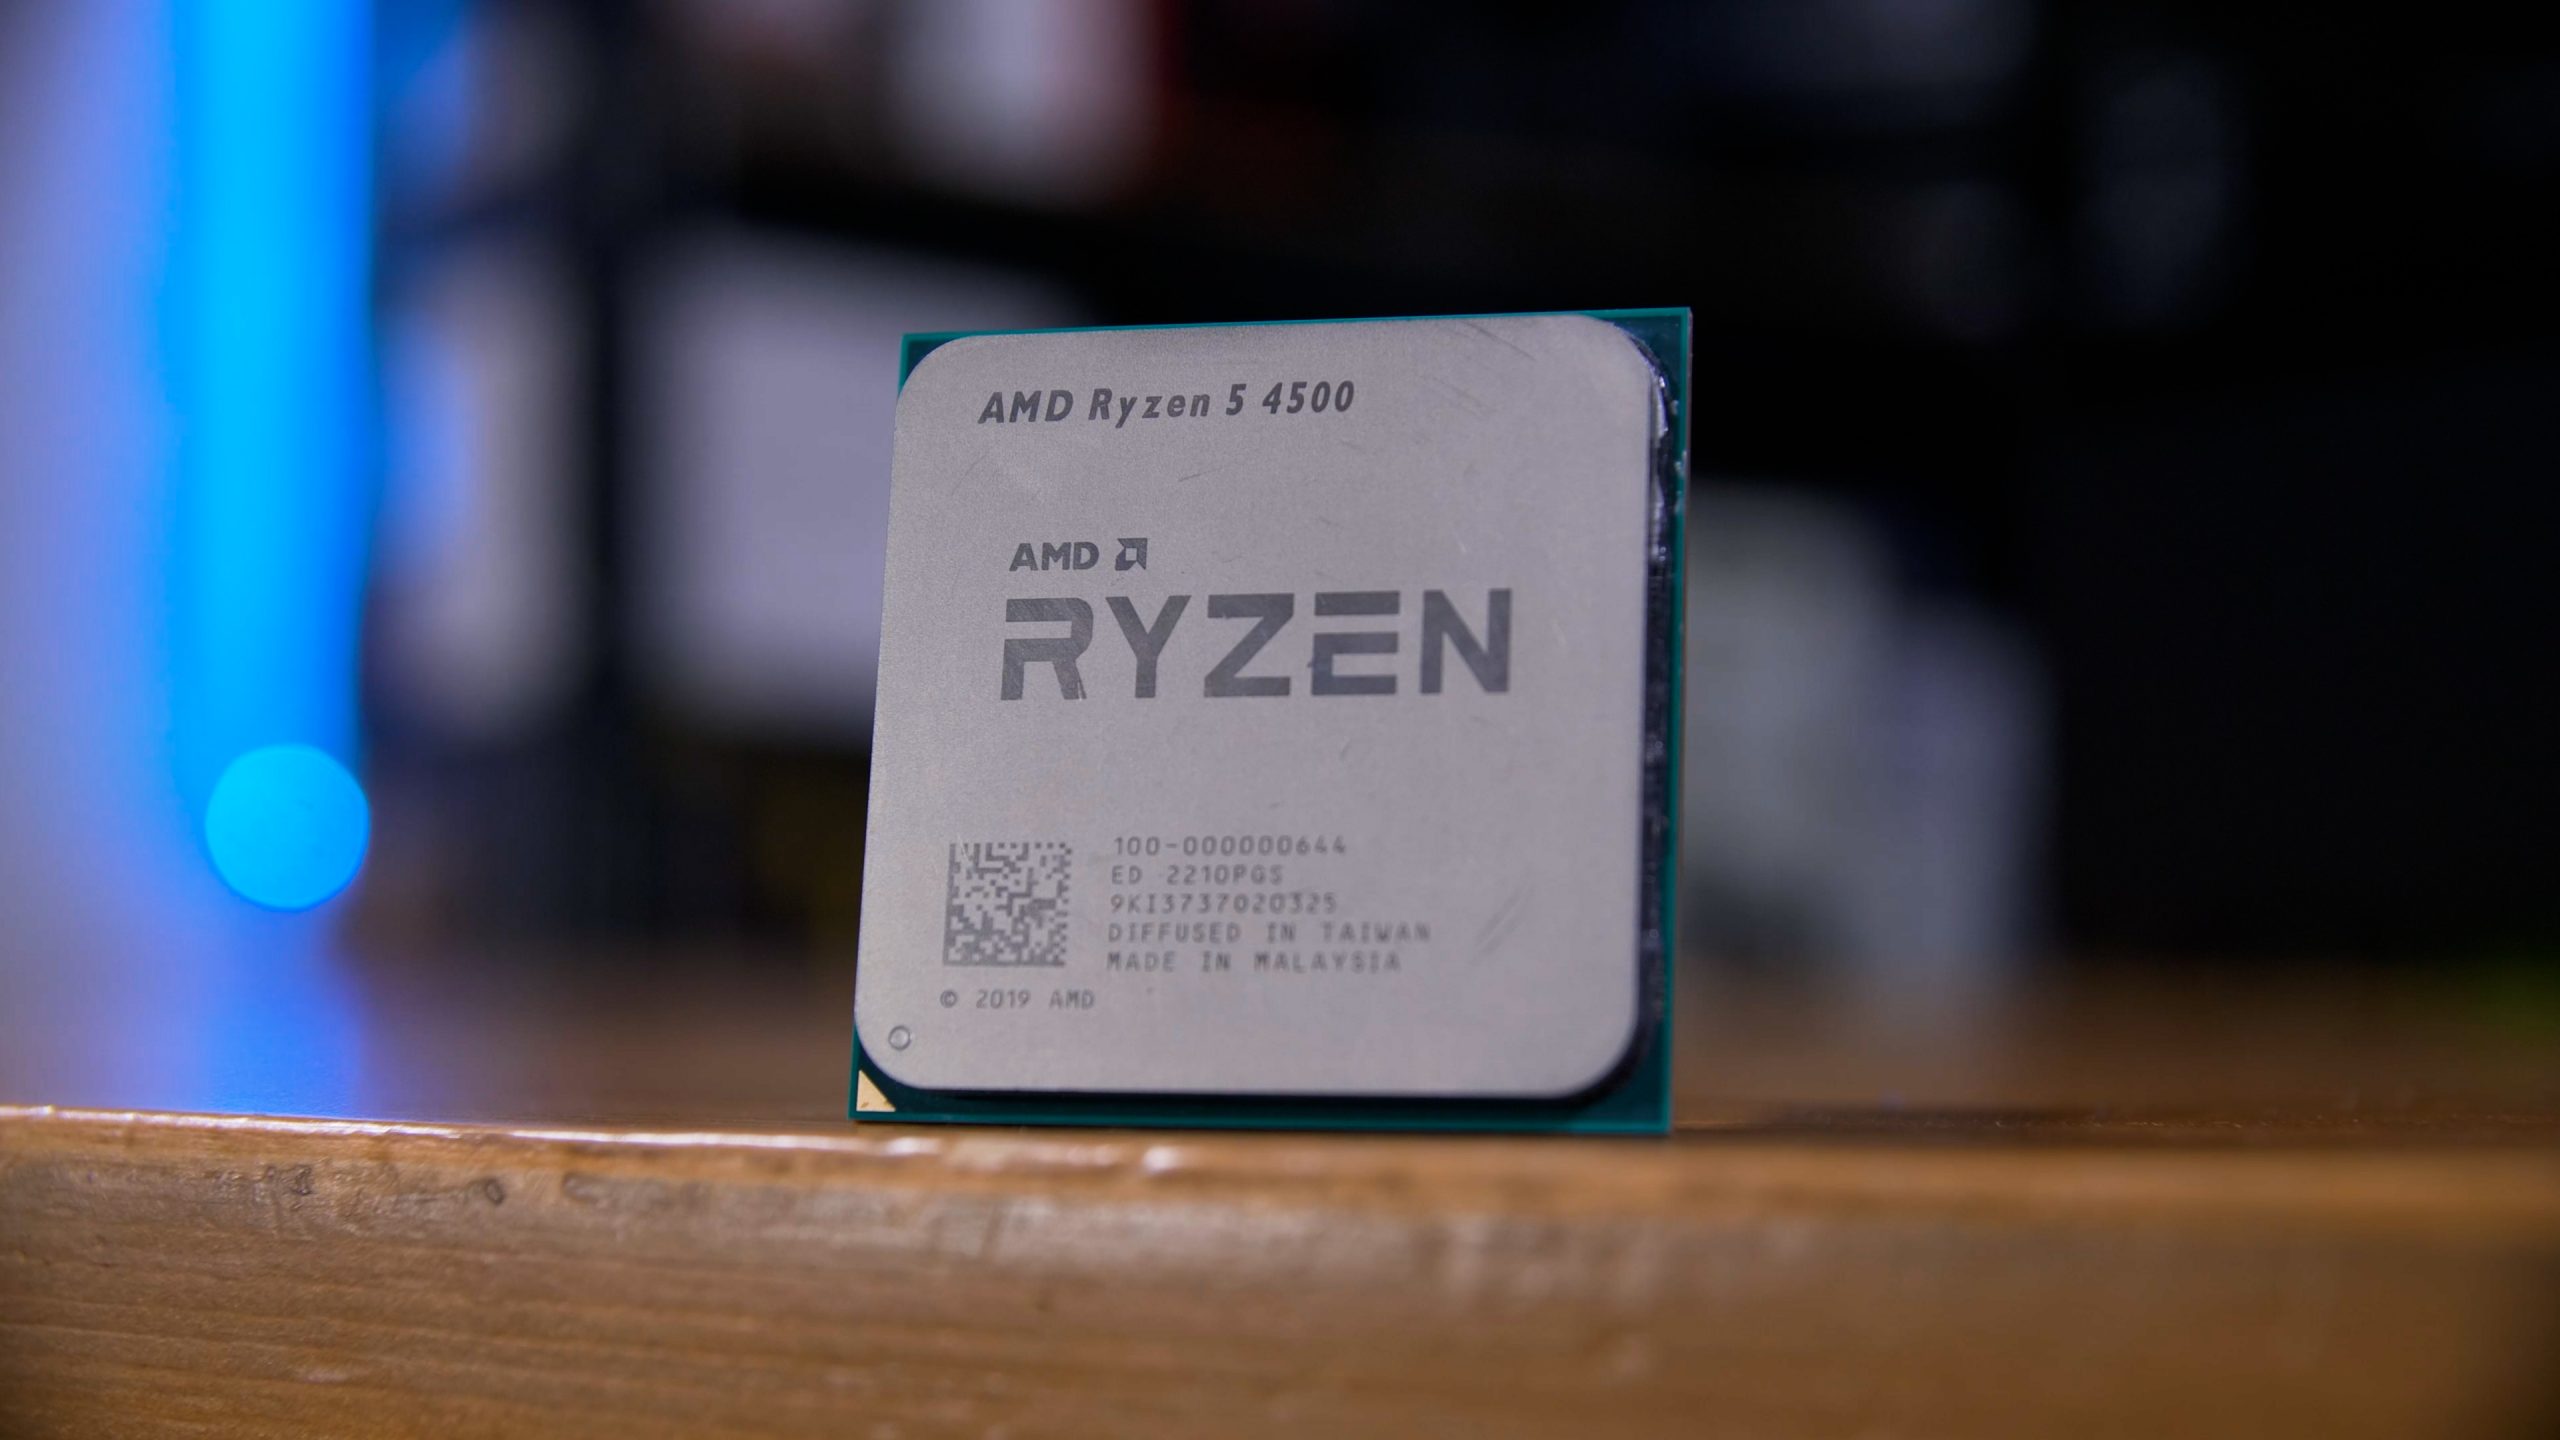 Ryzen 5 4500 Review – AMD Dumping Old Stock? + Budget Gaming PC